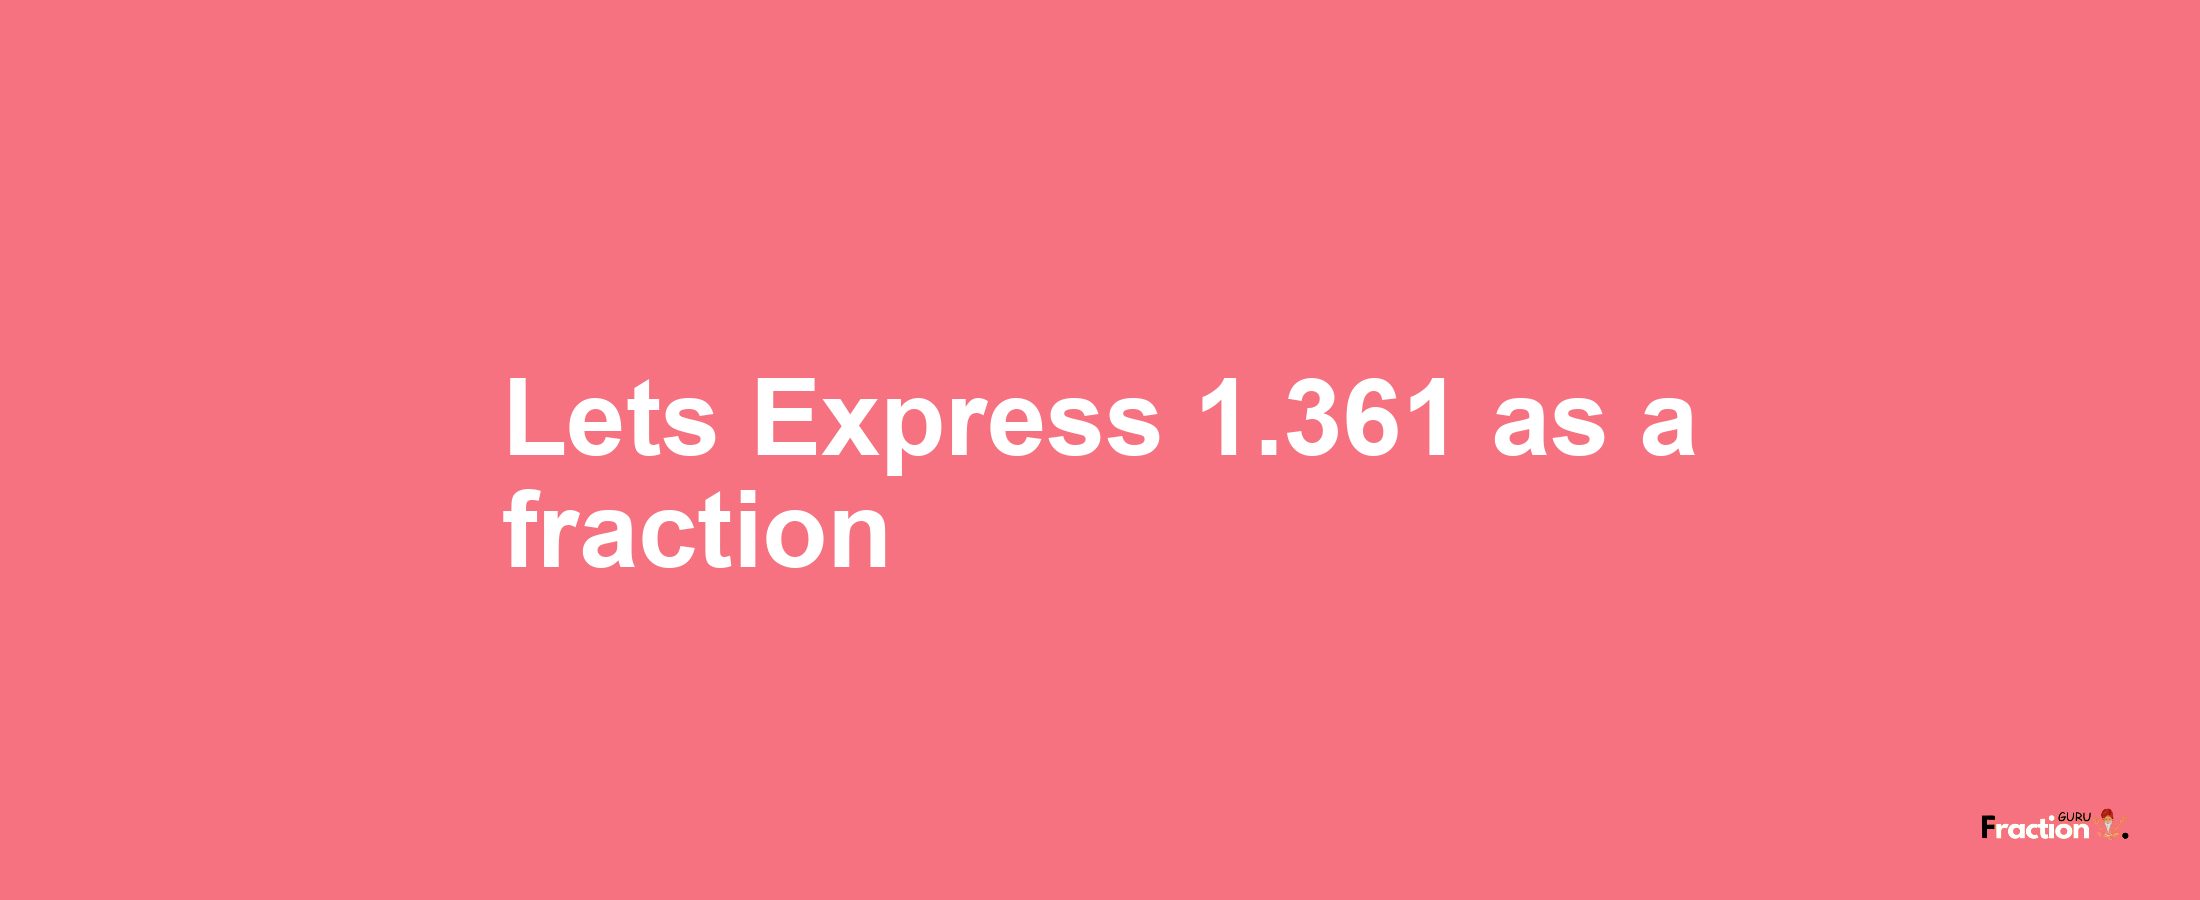 Lets Express 1.361 as afraction